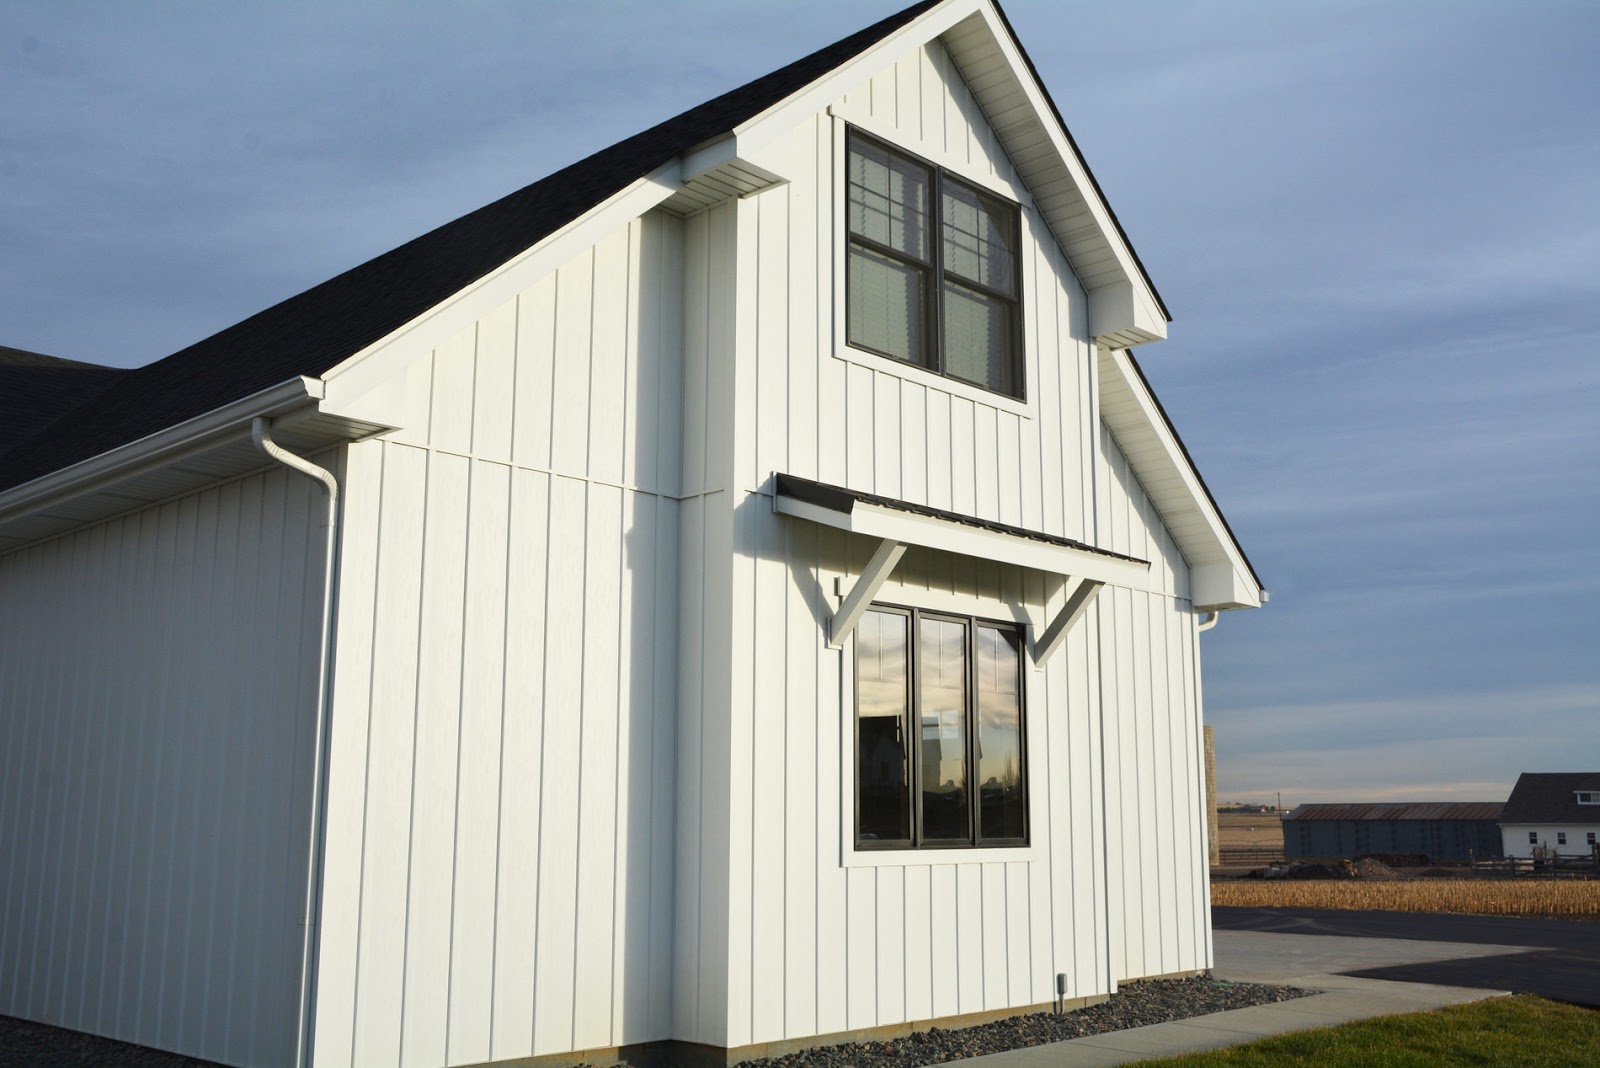 Where To Buy Board And Batten Siding